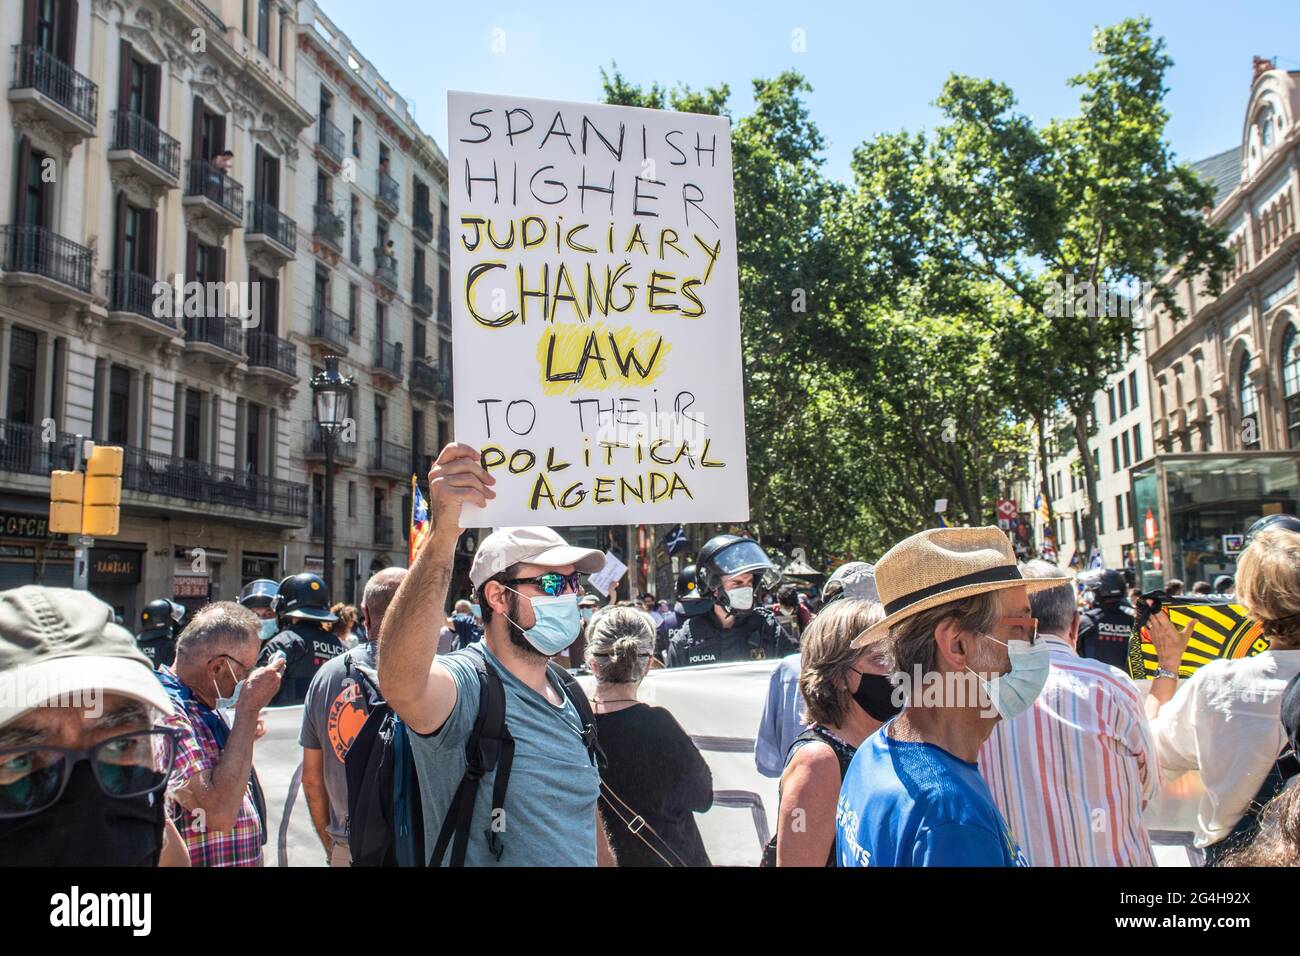 A protester holding a placard saying 'Spanish higher judiciary changes law to their political agenda' during the demonstration.Hundreds of Catalan independentistas have demonstrated in Las Ramblas in Barcelona, in front of the Gran Teatre del Liceu (Great Theater of the Lyceum), shielded by many policemen, to protest the visit of the President of the Spanish Government, Pedro Sanchez, who has held a conference entitled 'Reunion: a project for the future for all of Spain', with the expectation of an imminent granting of pardons for the independence leaders in prison. The protesters protested to Stock Photo